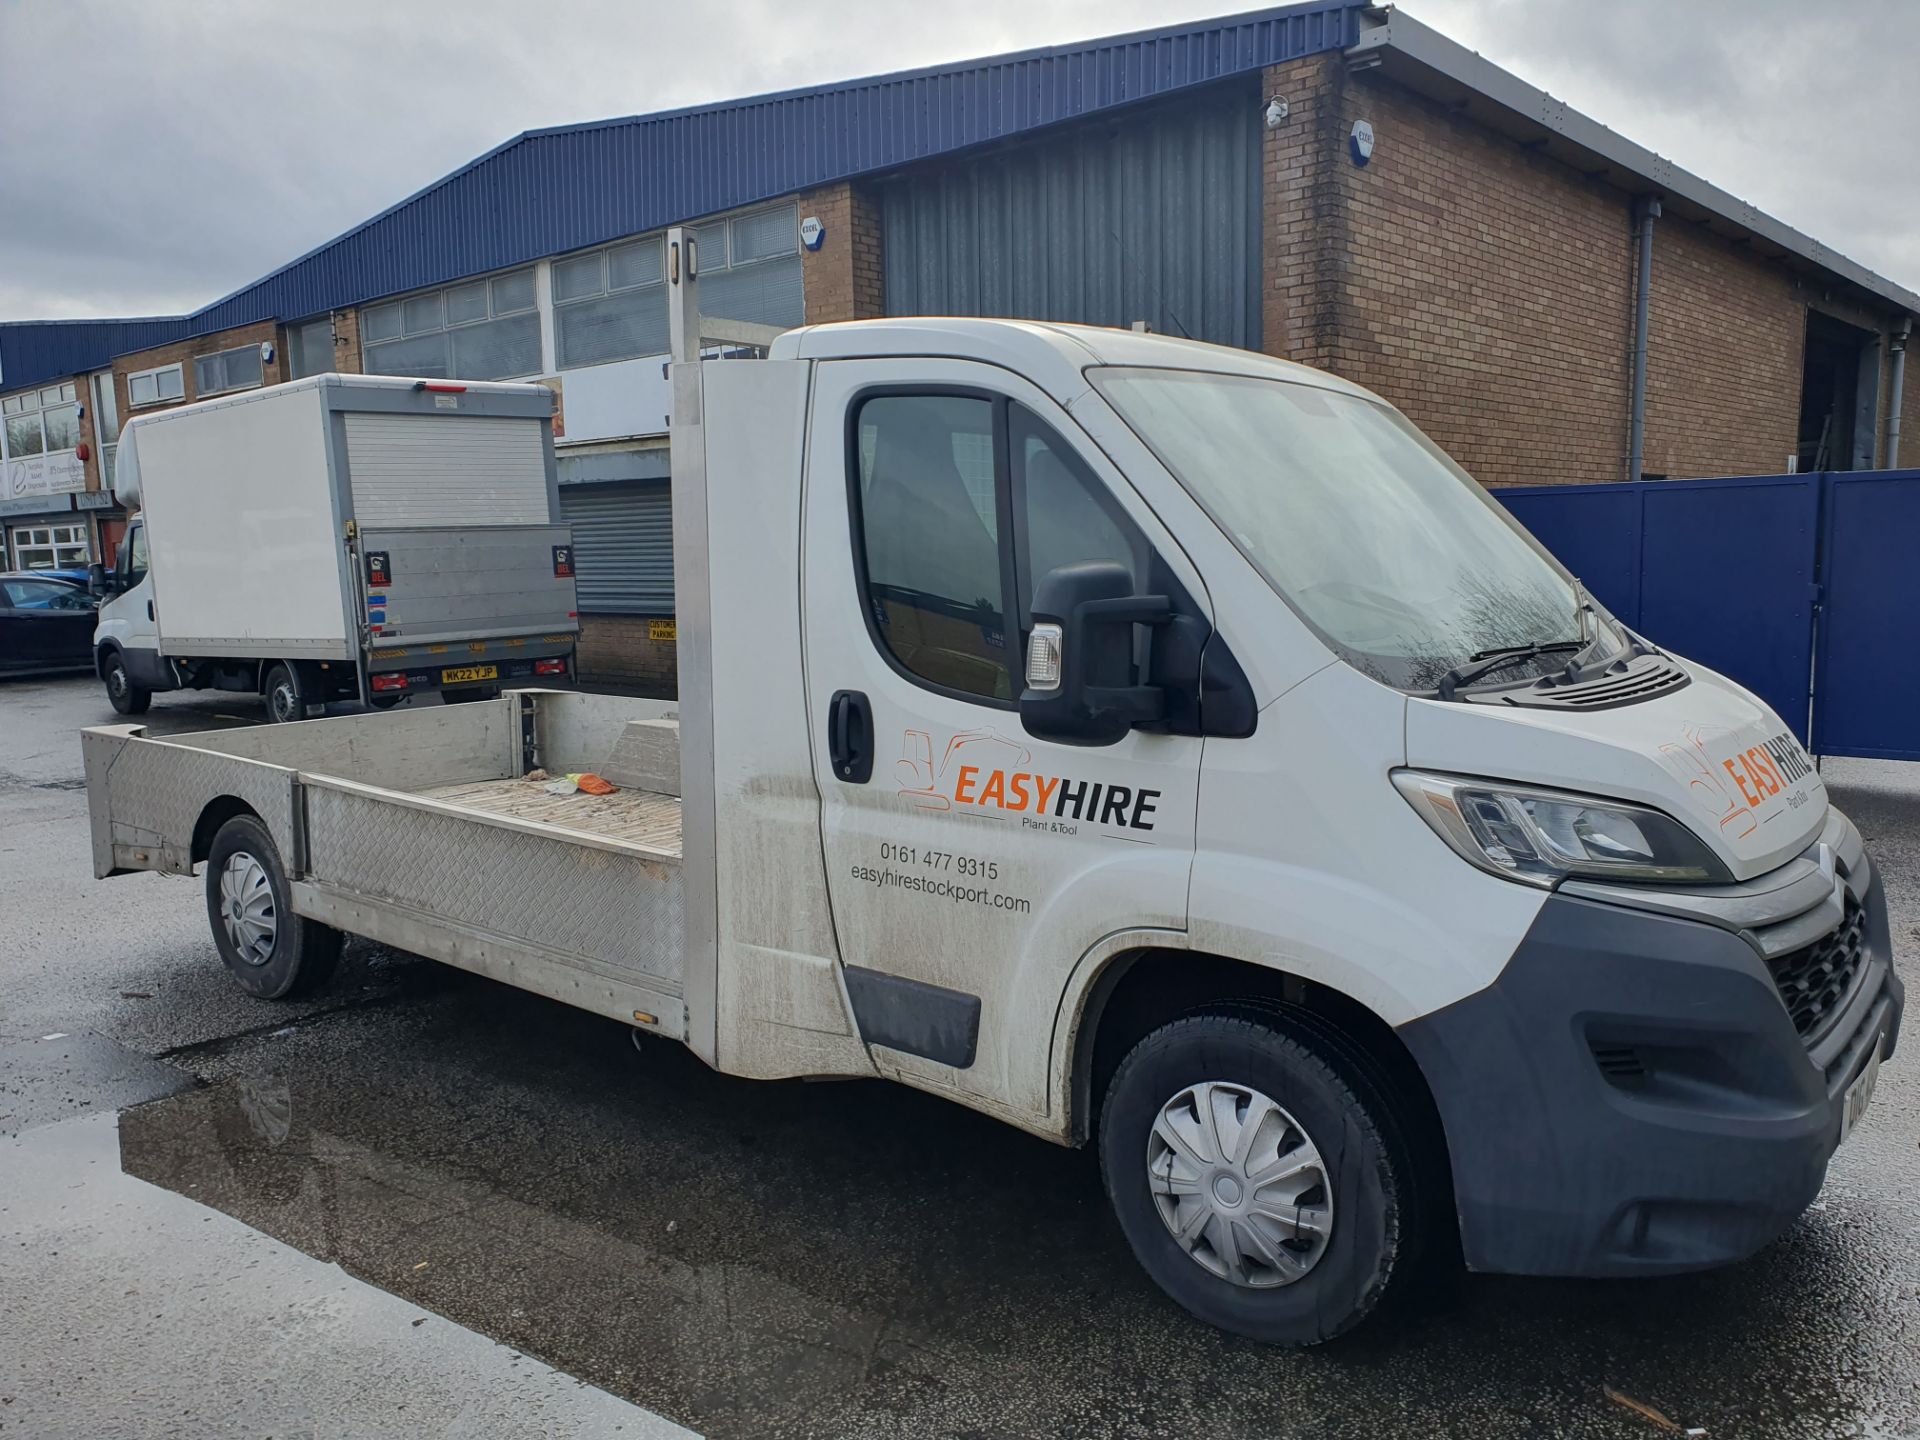 Citroen Relay X2-50 Flat Lorry w/ Loading Ramp Sides | DIG 4928 | 148,060 Miles